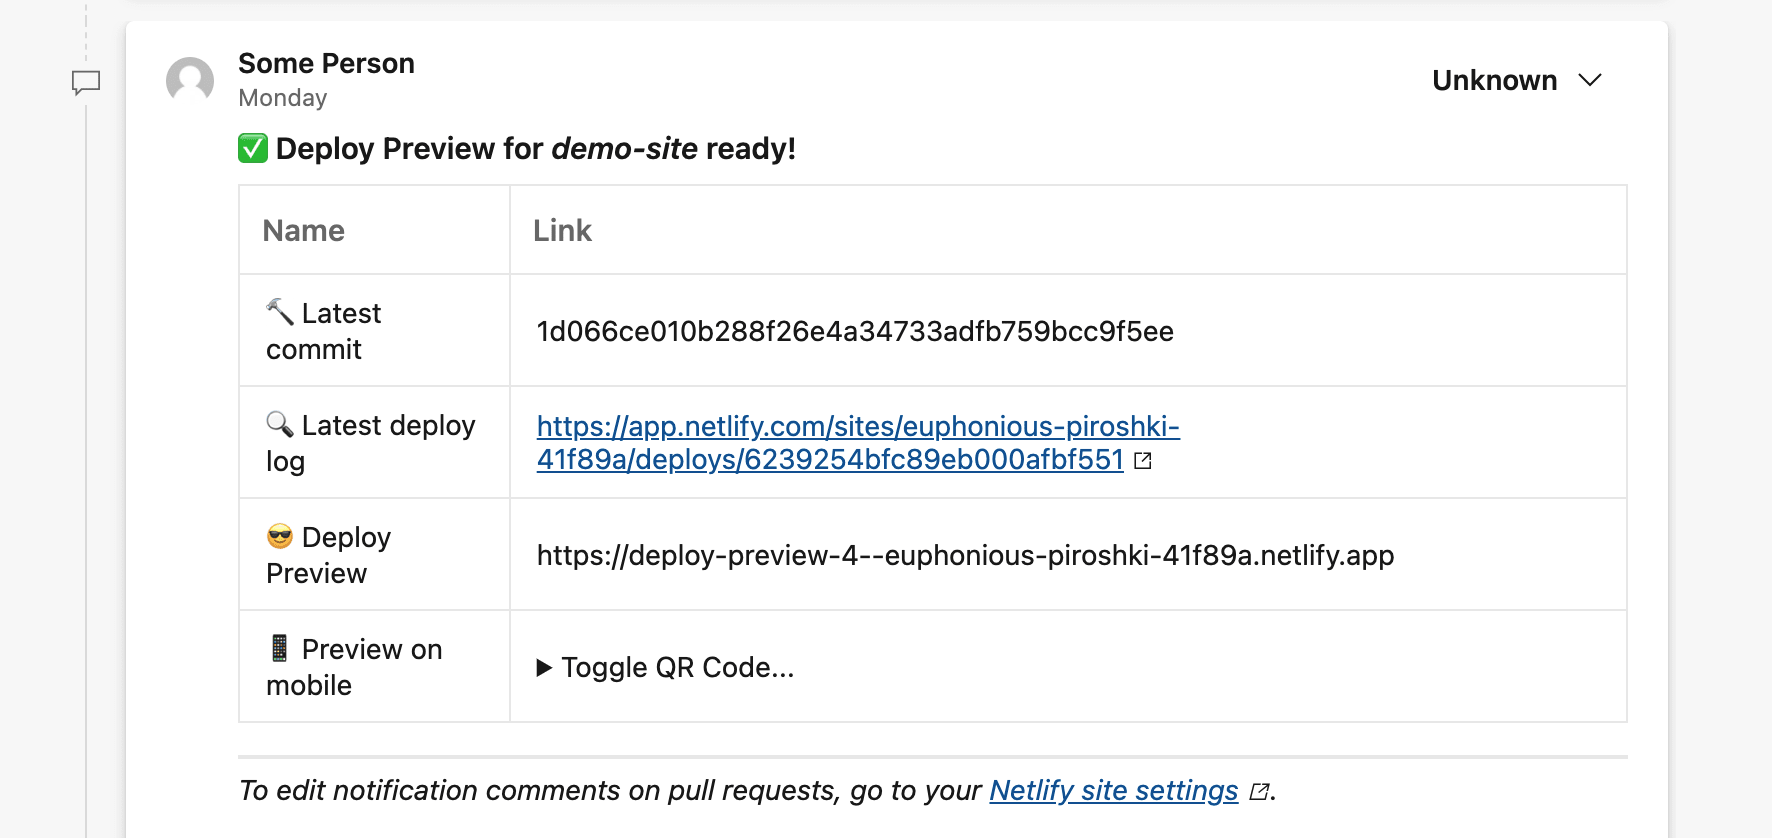 Pull requests comments in Azure DevOps include helpful information from Netlify with the latest commit, latest deploy log, deploy preview link, and a QR code for easy testing on mobile.